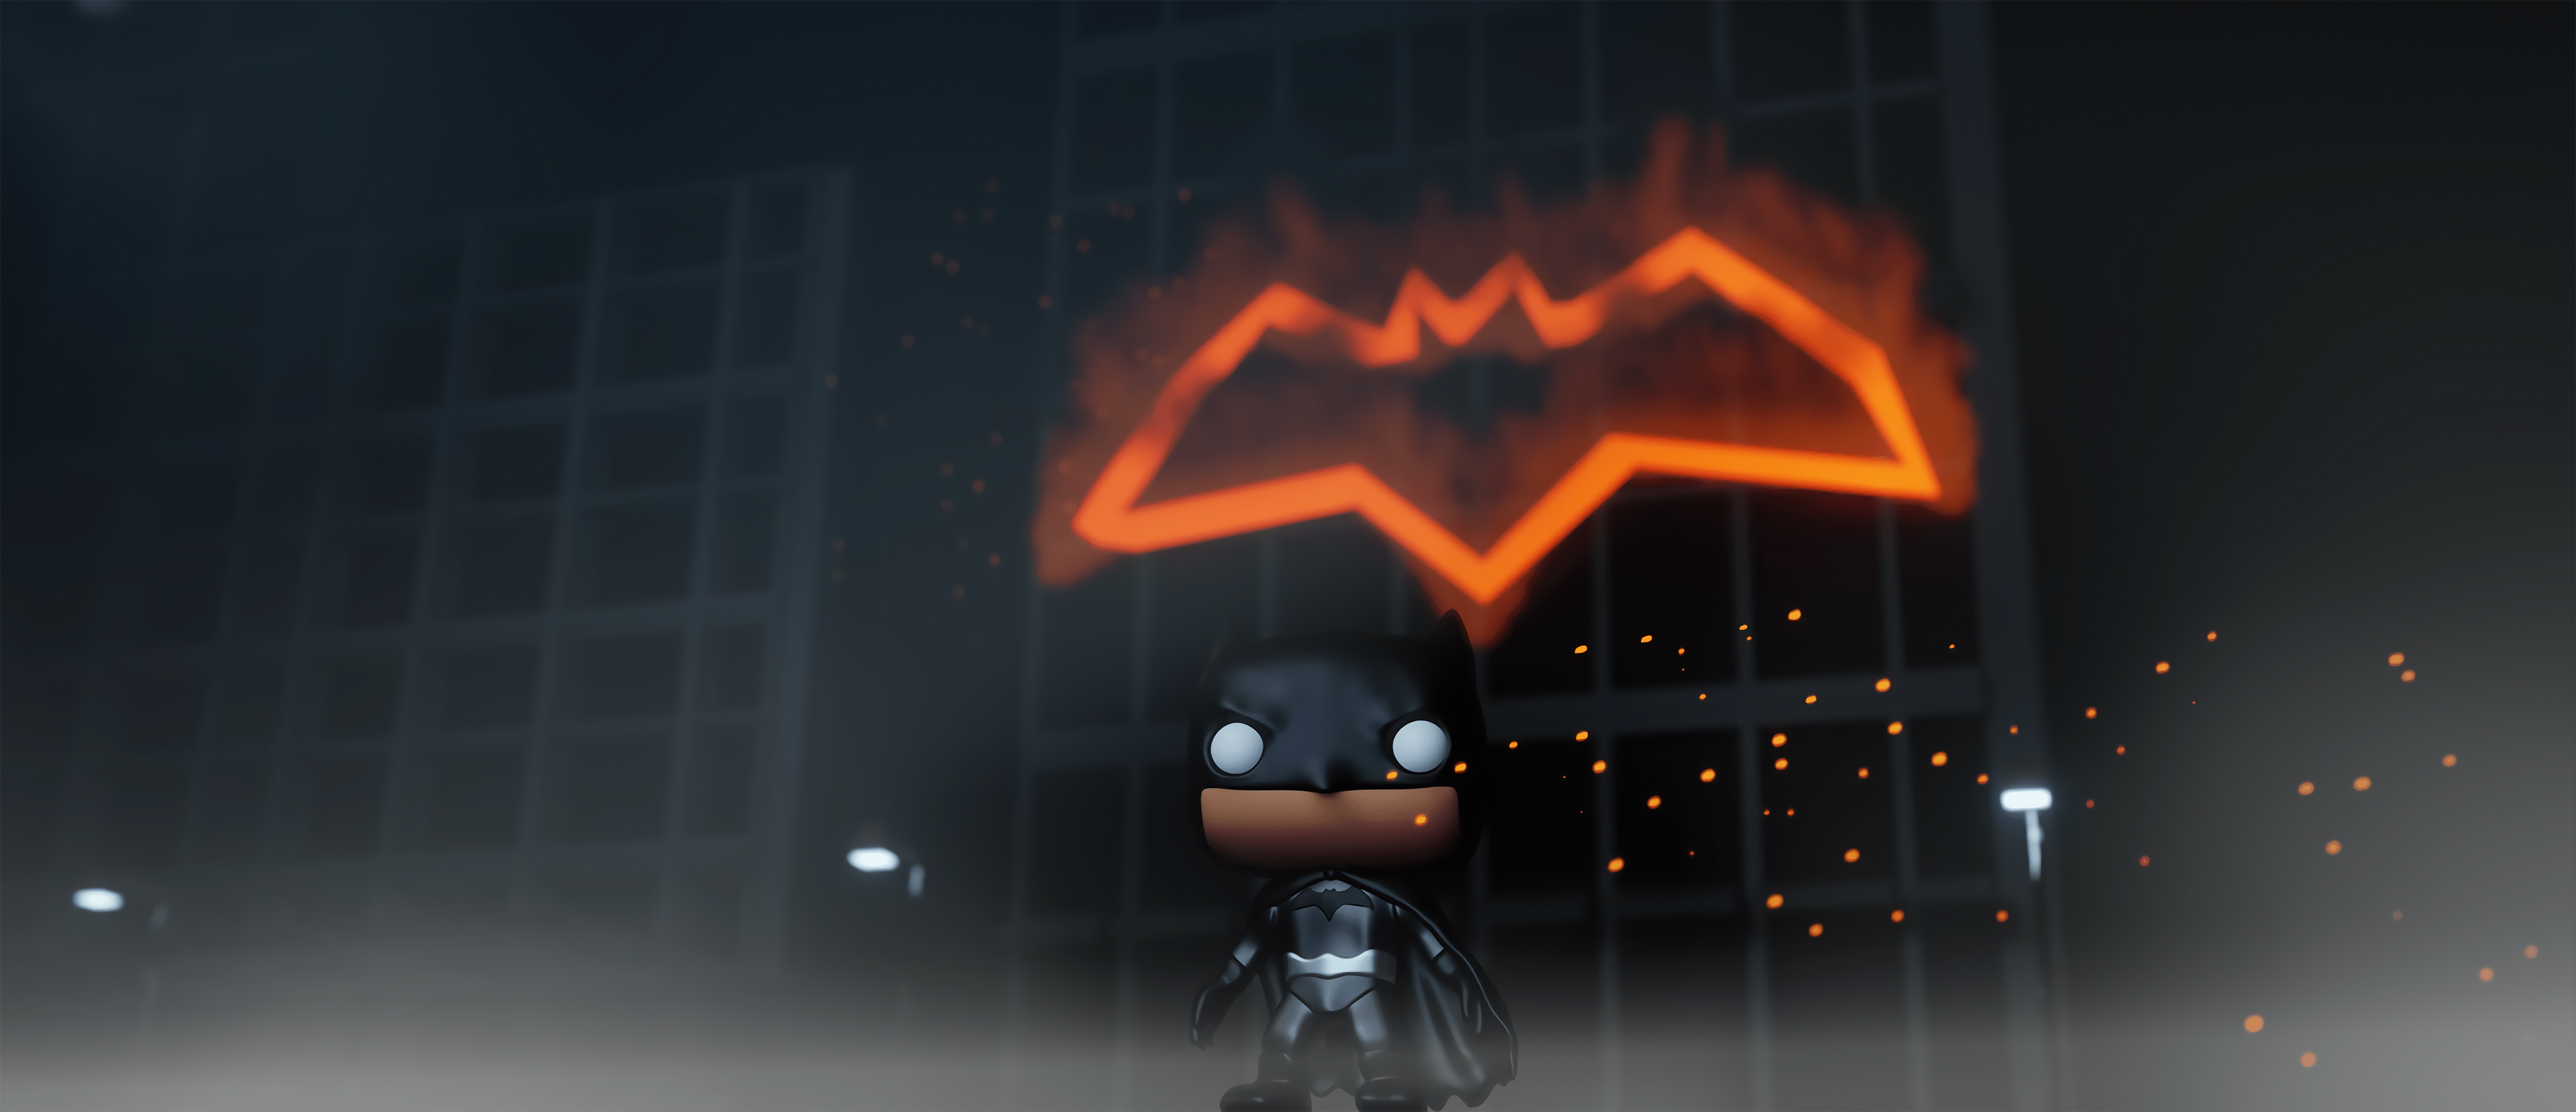 Batman Funko Pop Art 5k, HD Superheroes, 4k Wallpapers, Images, Backgrounds,  Photos and Pictures